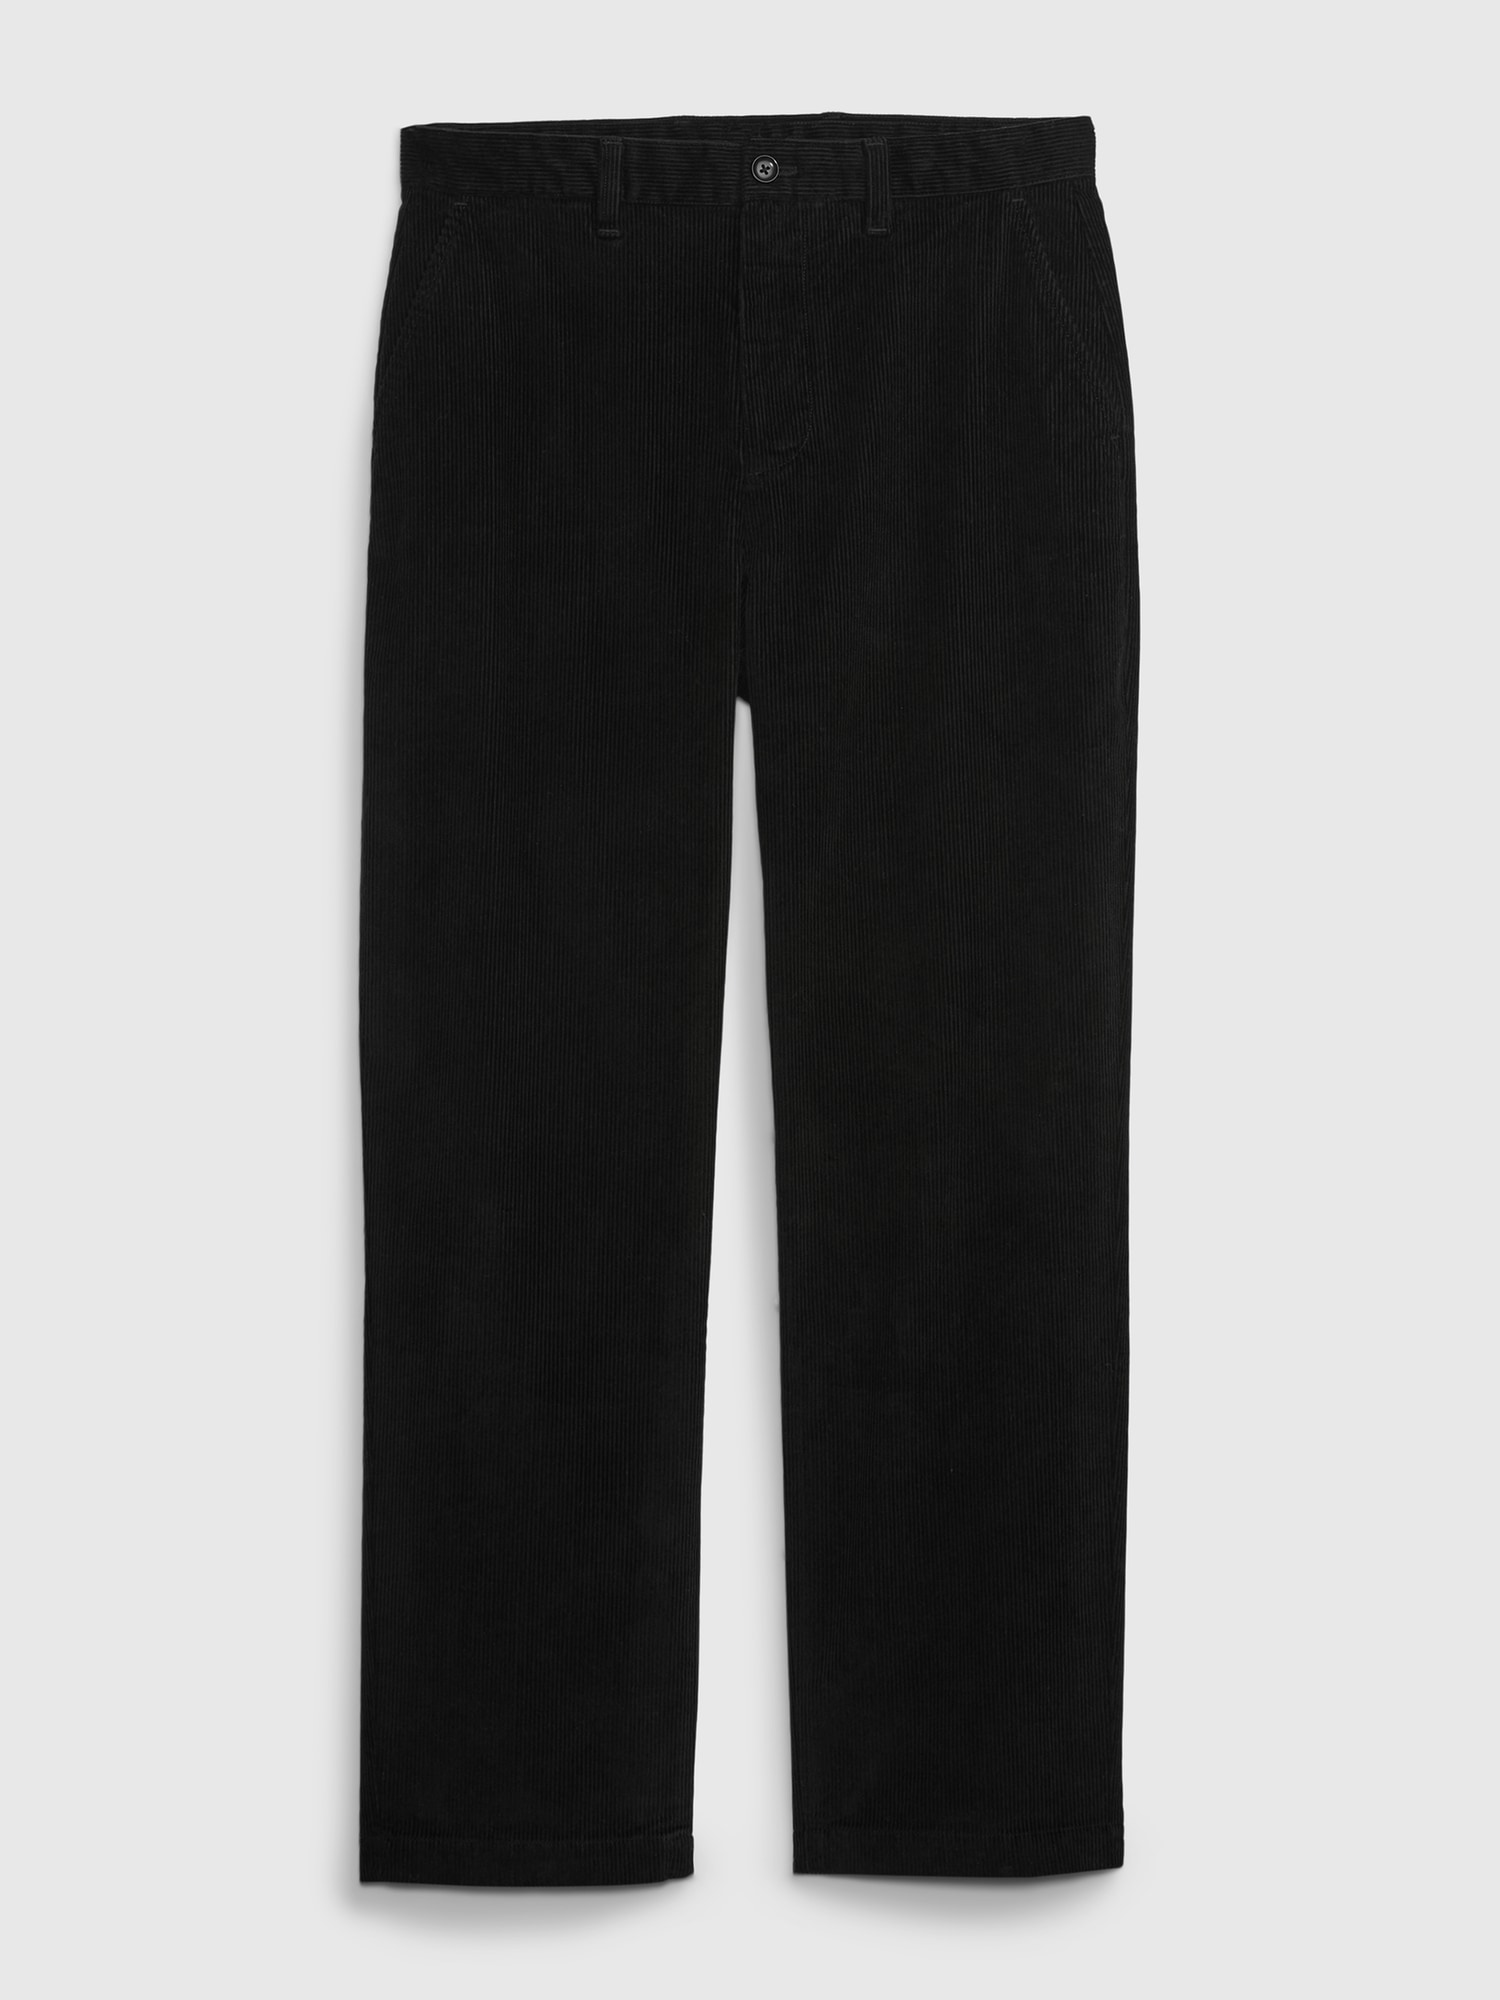 Wide Wale Relaxed Corduroy Pants | Gap